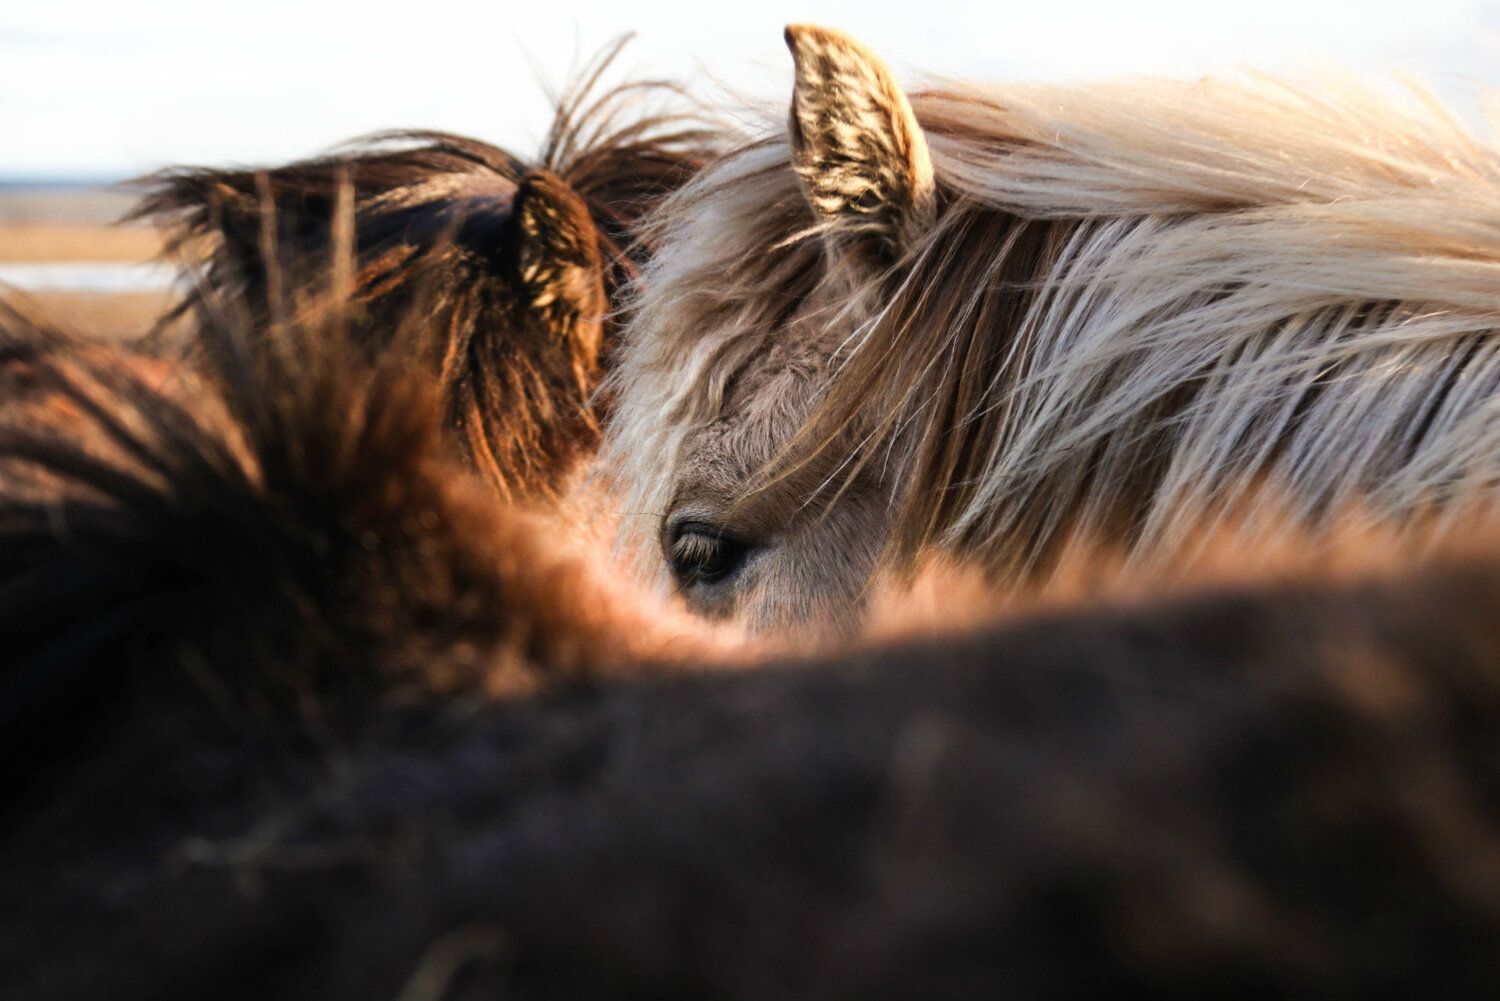 Icelandic Horses: Here's What You Need to Know